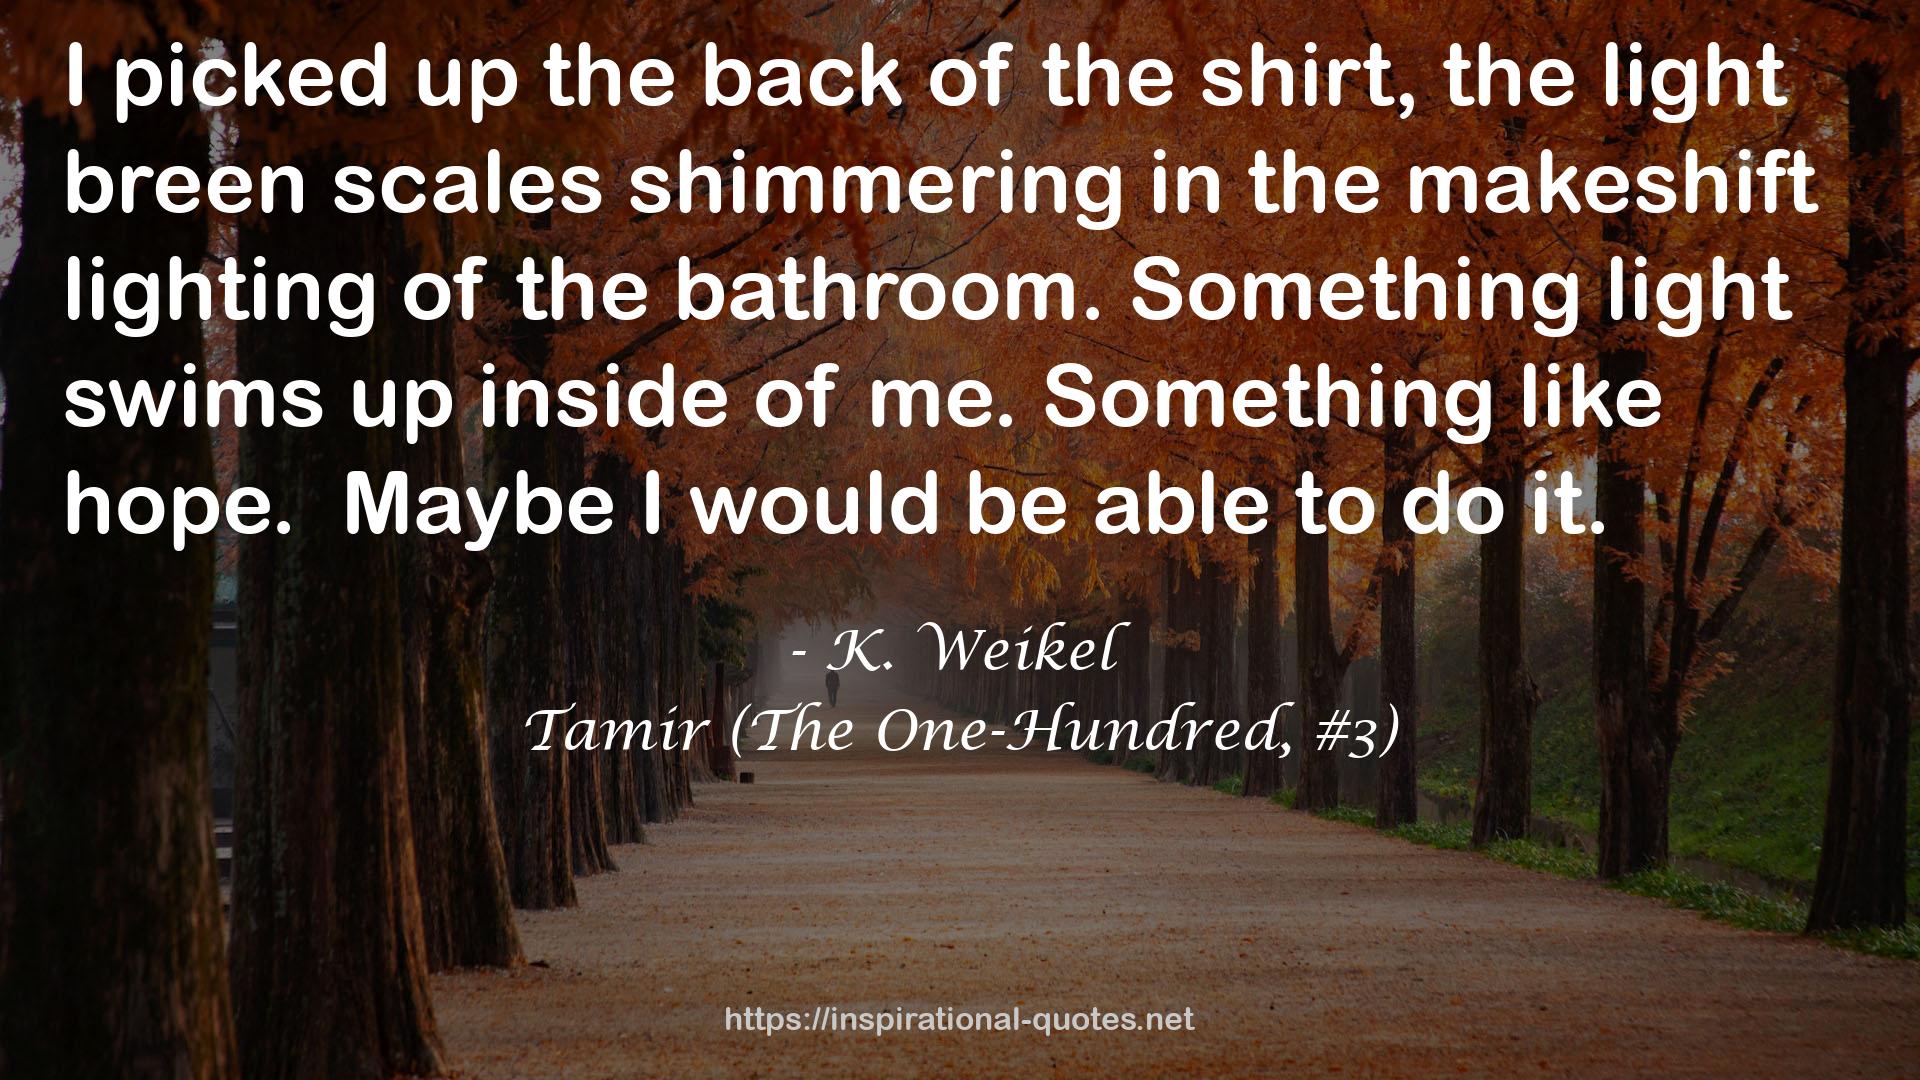 Tamir (The One-Hundred, #3) QUOTES